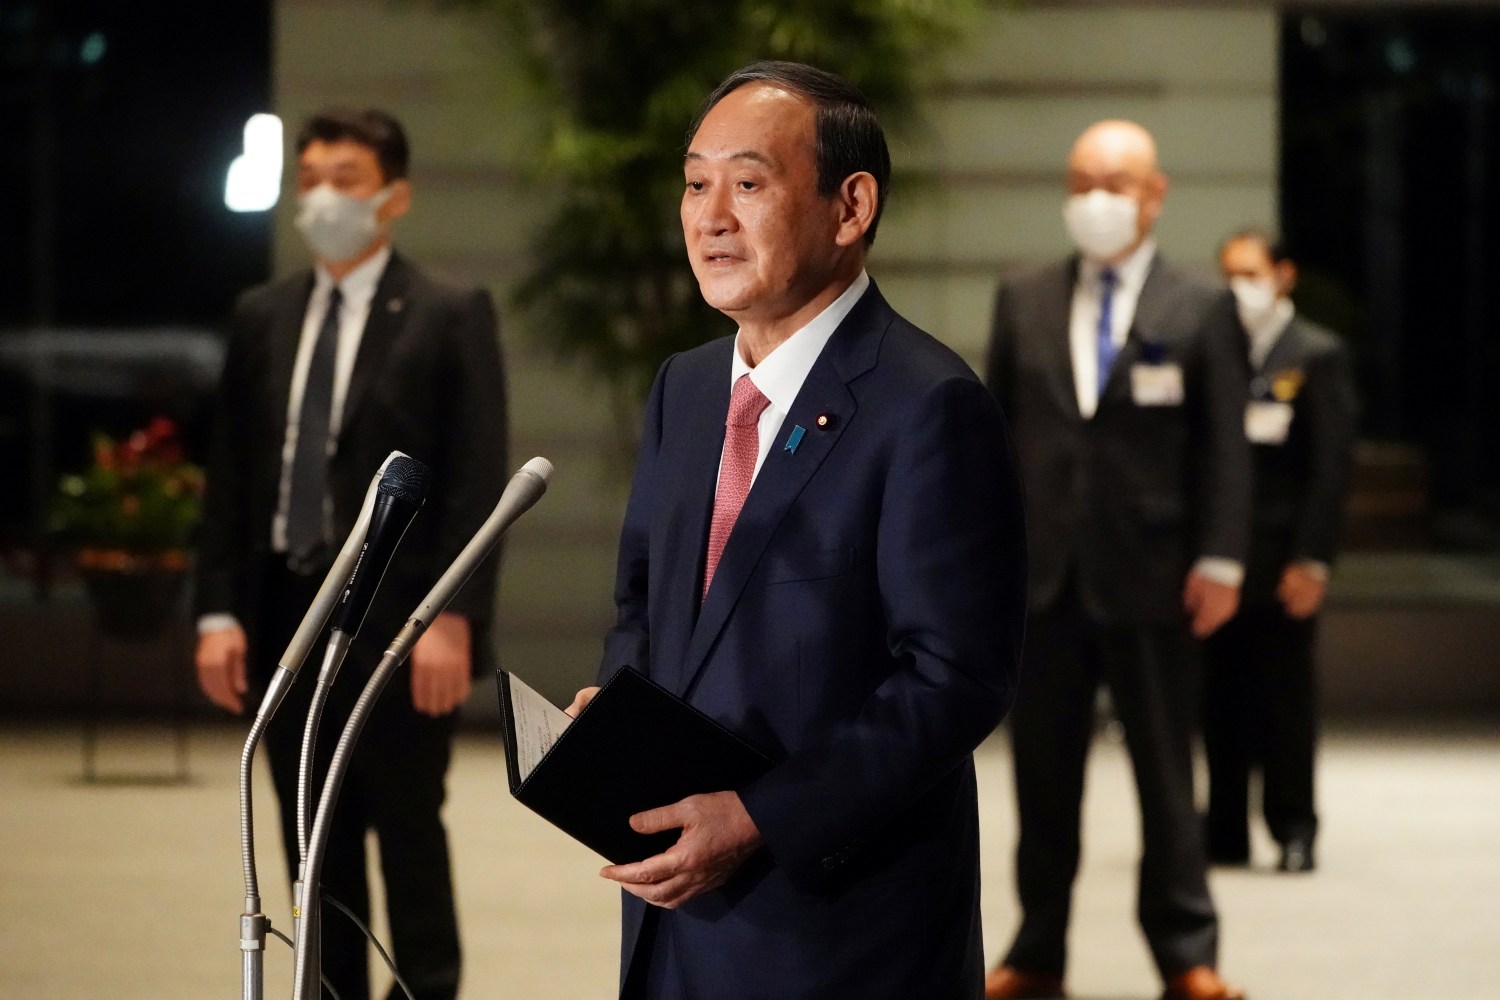 Japanese Prime Minister Yoshihide Suga speaks to media after announcing that Tokyo, Kyoto and Okinawa will have pre-emergency status under a new prevention law during a government task force meeting at the prime minister's office, Tokyo, Japan, April 9, 2021. Eugene Hoshiko/Pool via Reuters